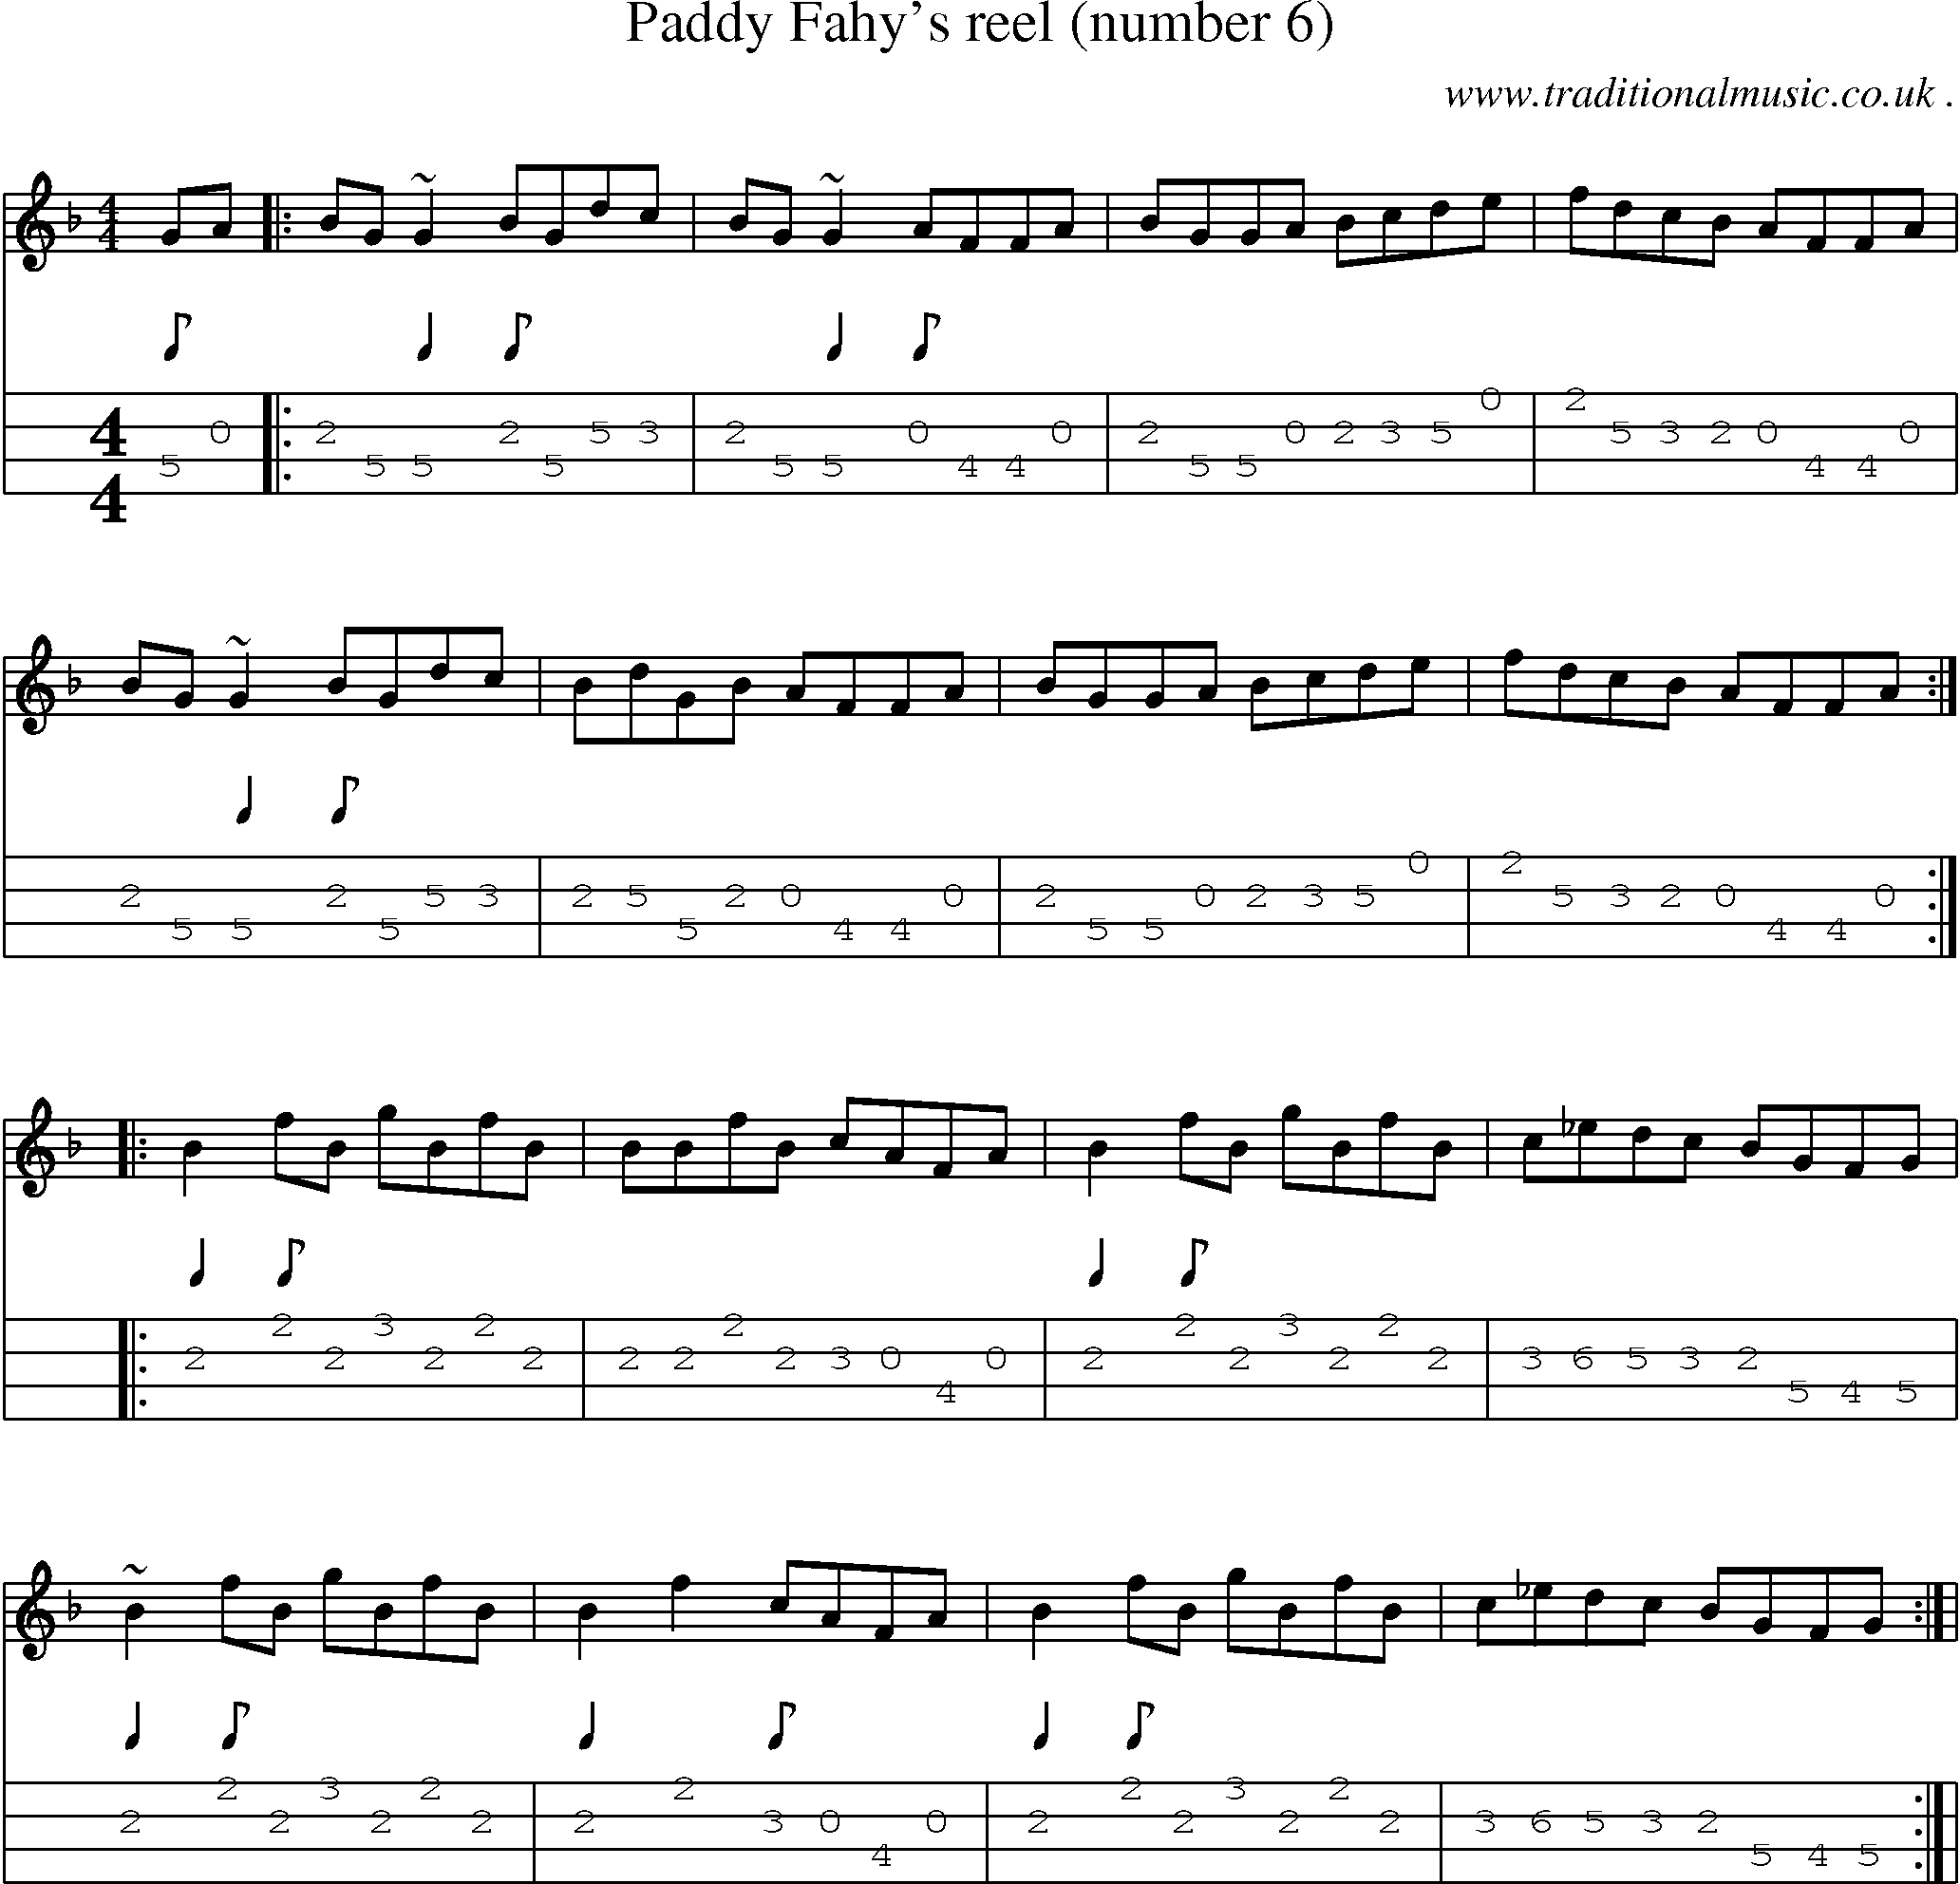 Sheet-music  score, Chords and Mandolin Tabs for Paddy Fahys Reel Number 6